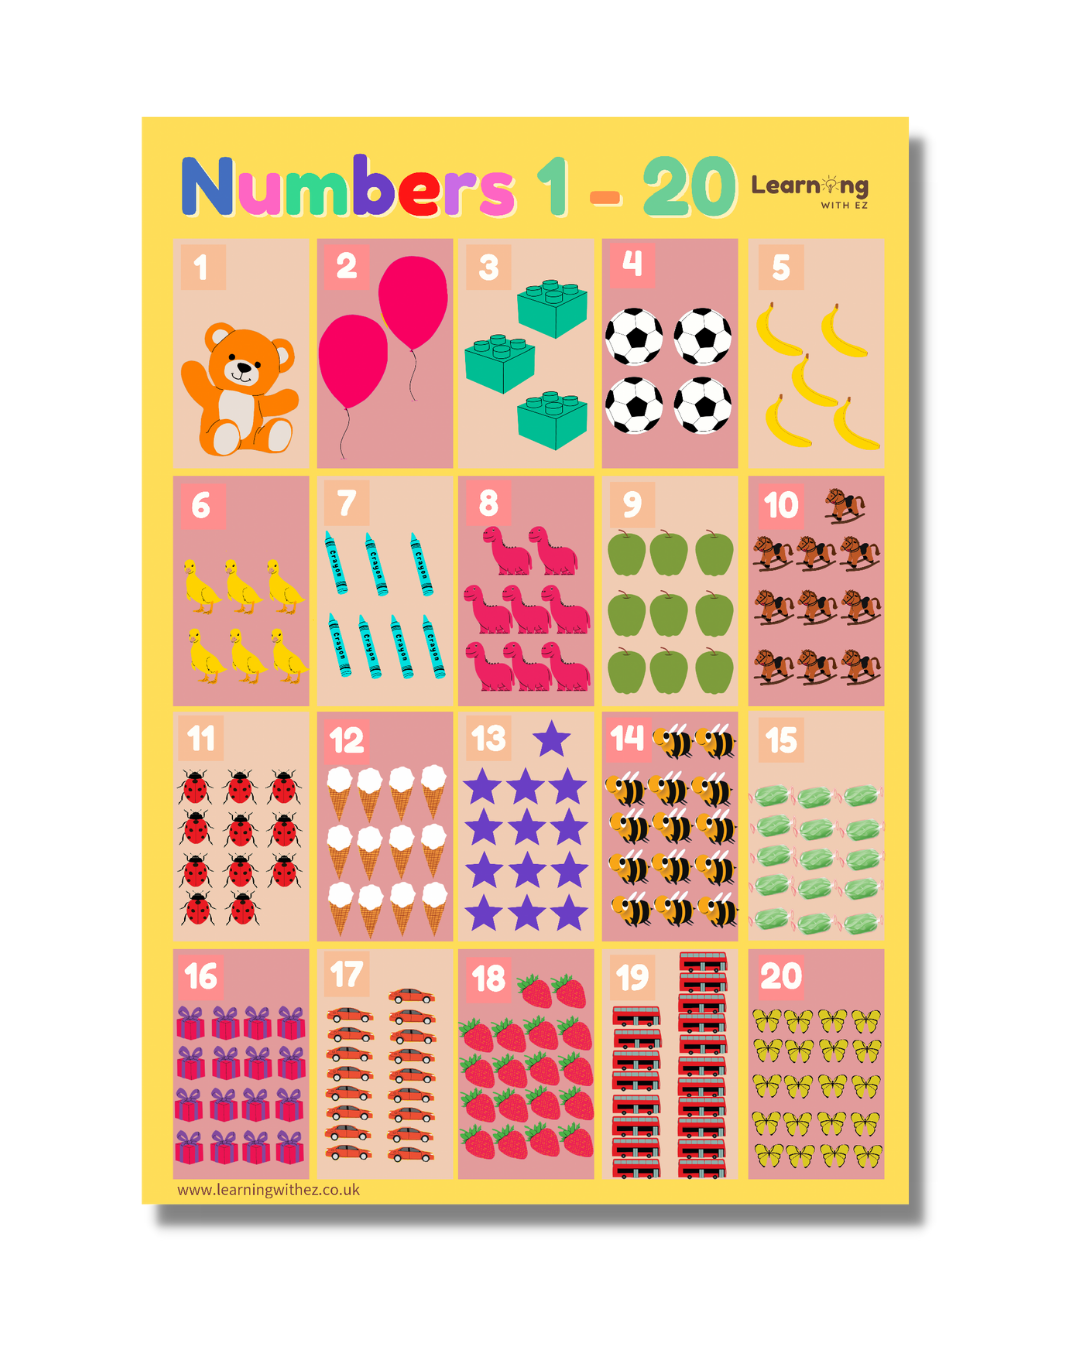 Numbers 1-20 Poster